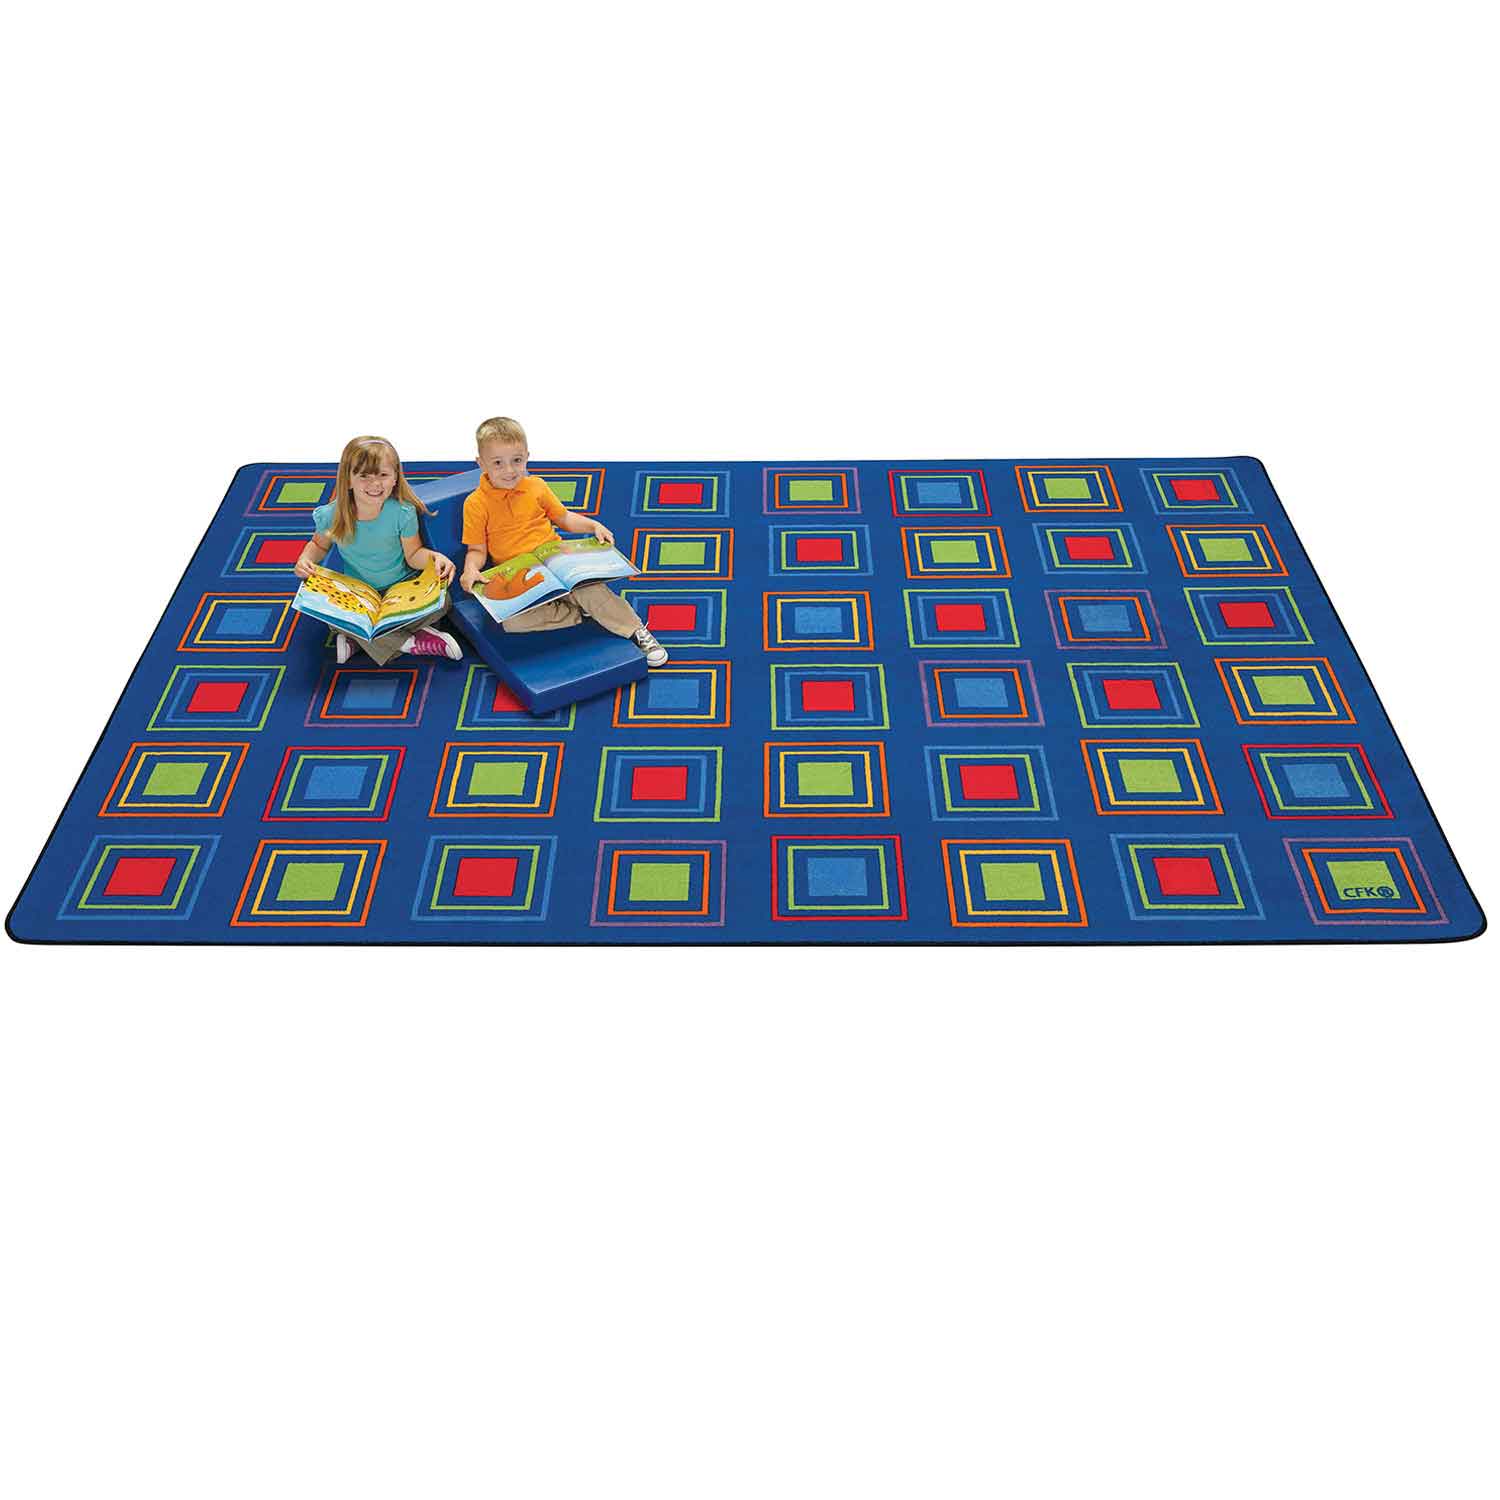 Primary Squares Seating Rug